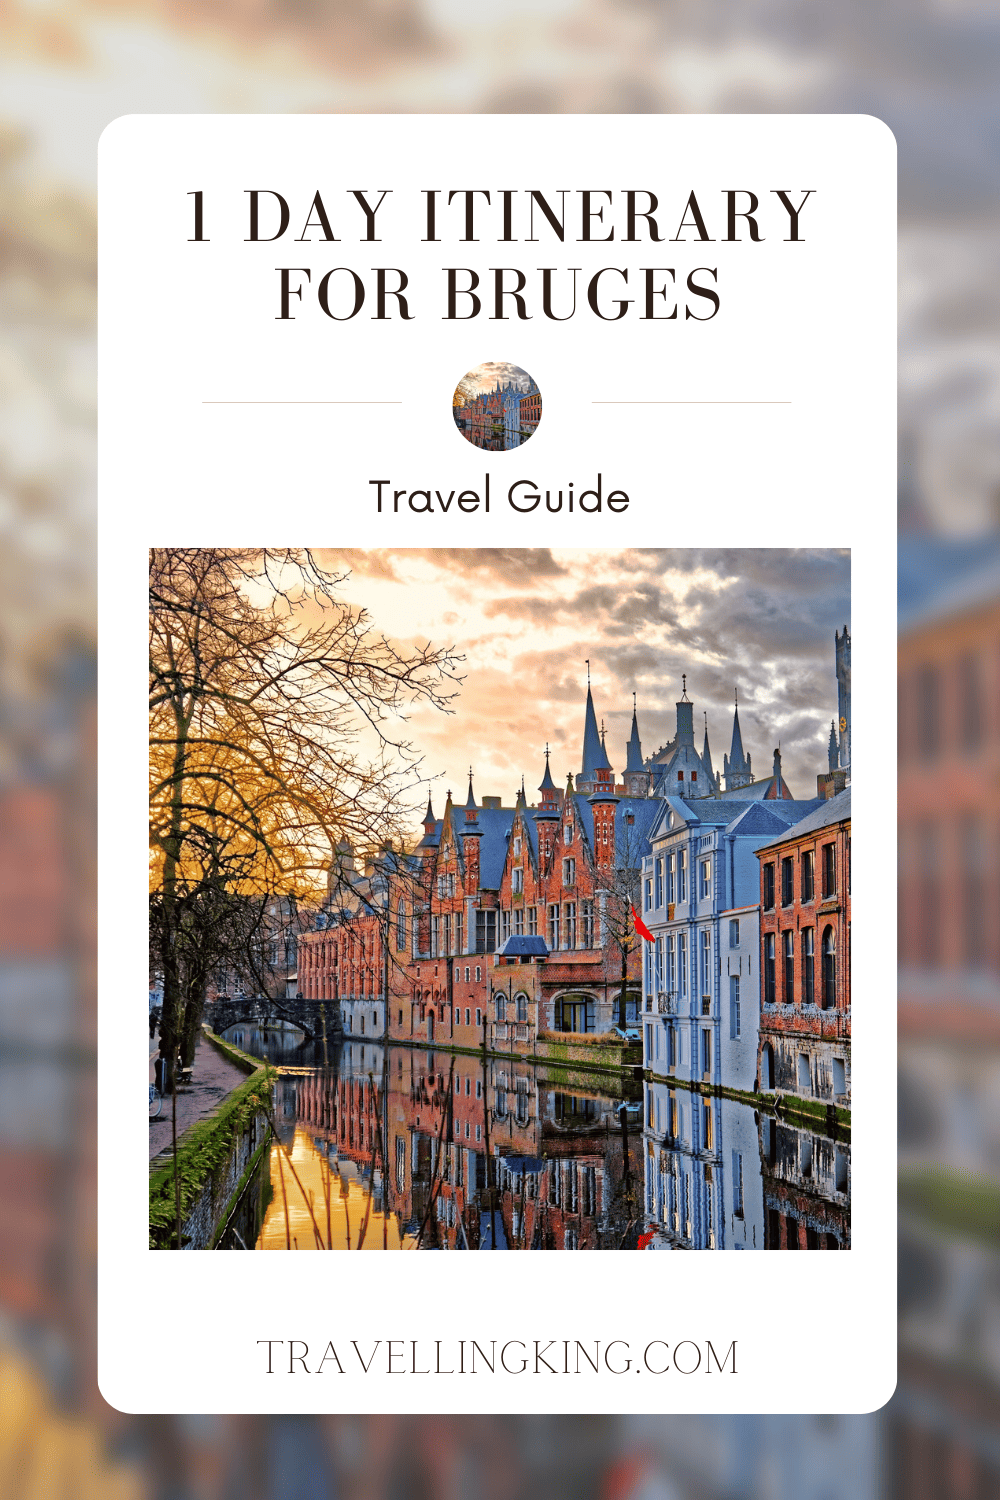 1 Day Itinerary for Bruges